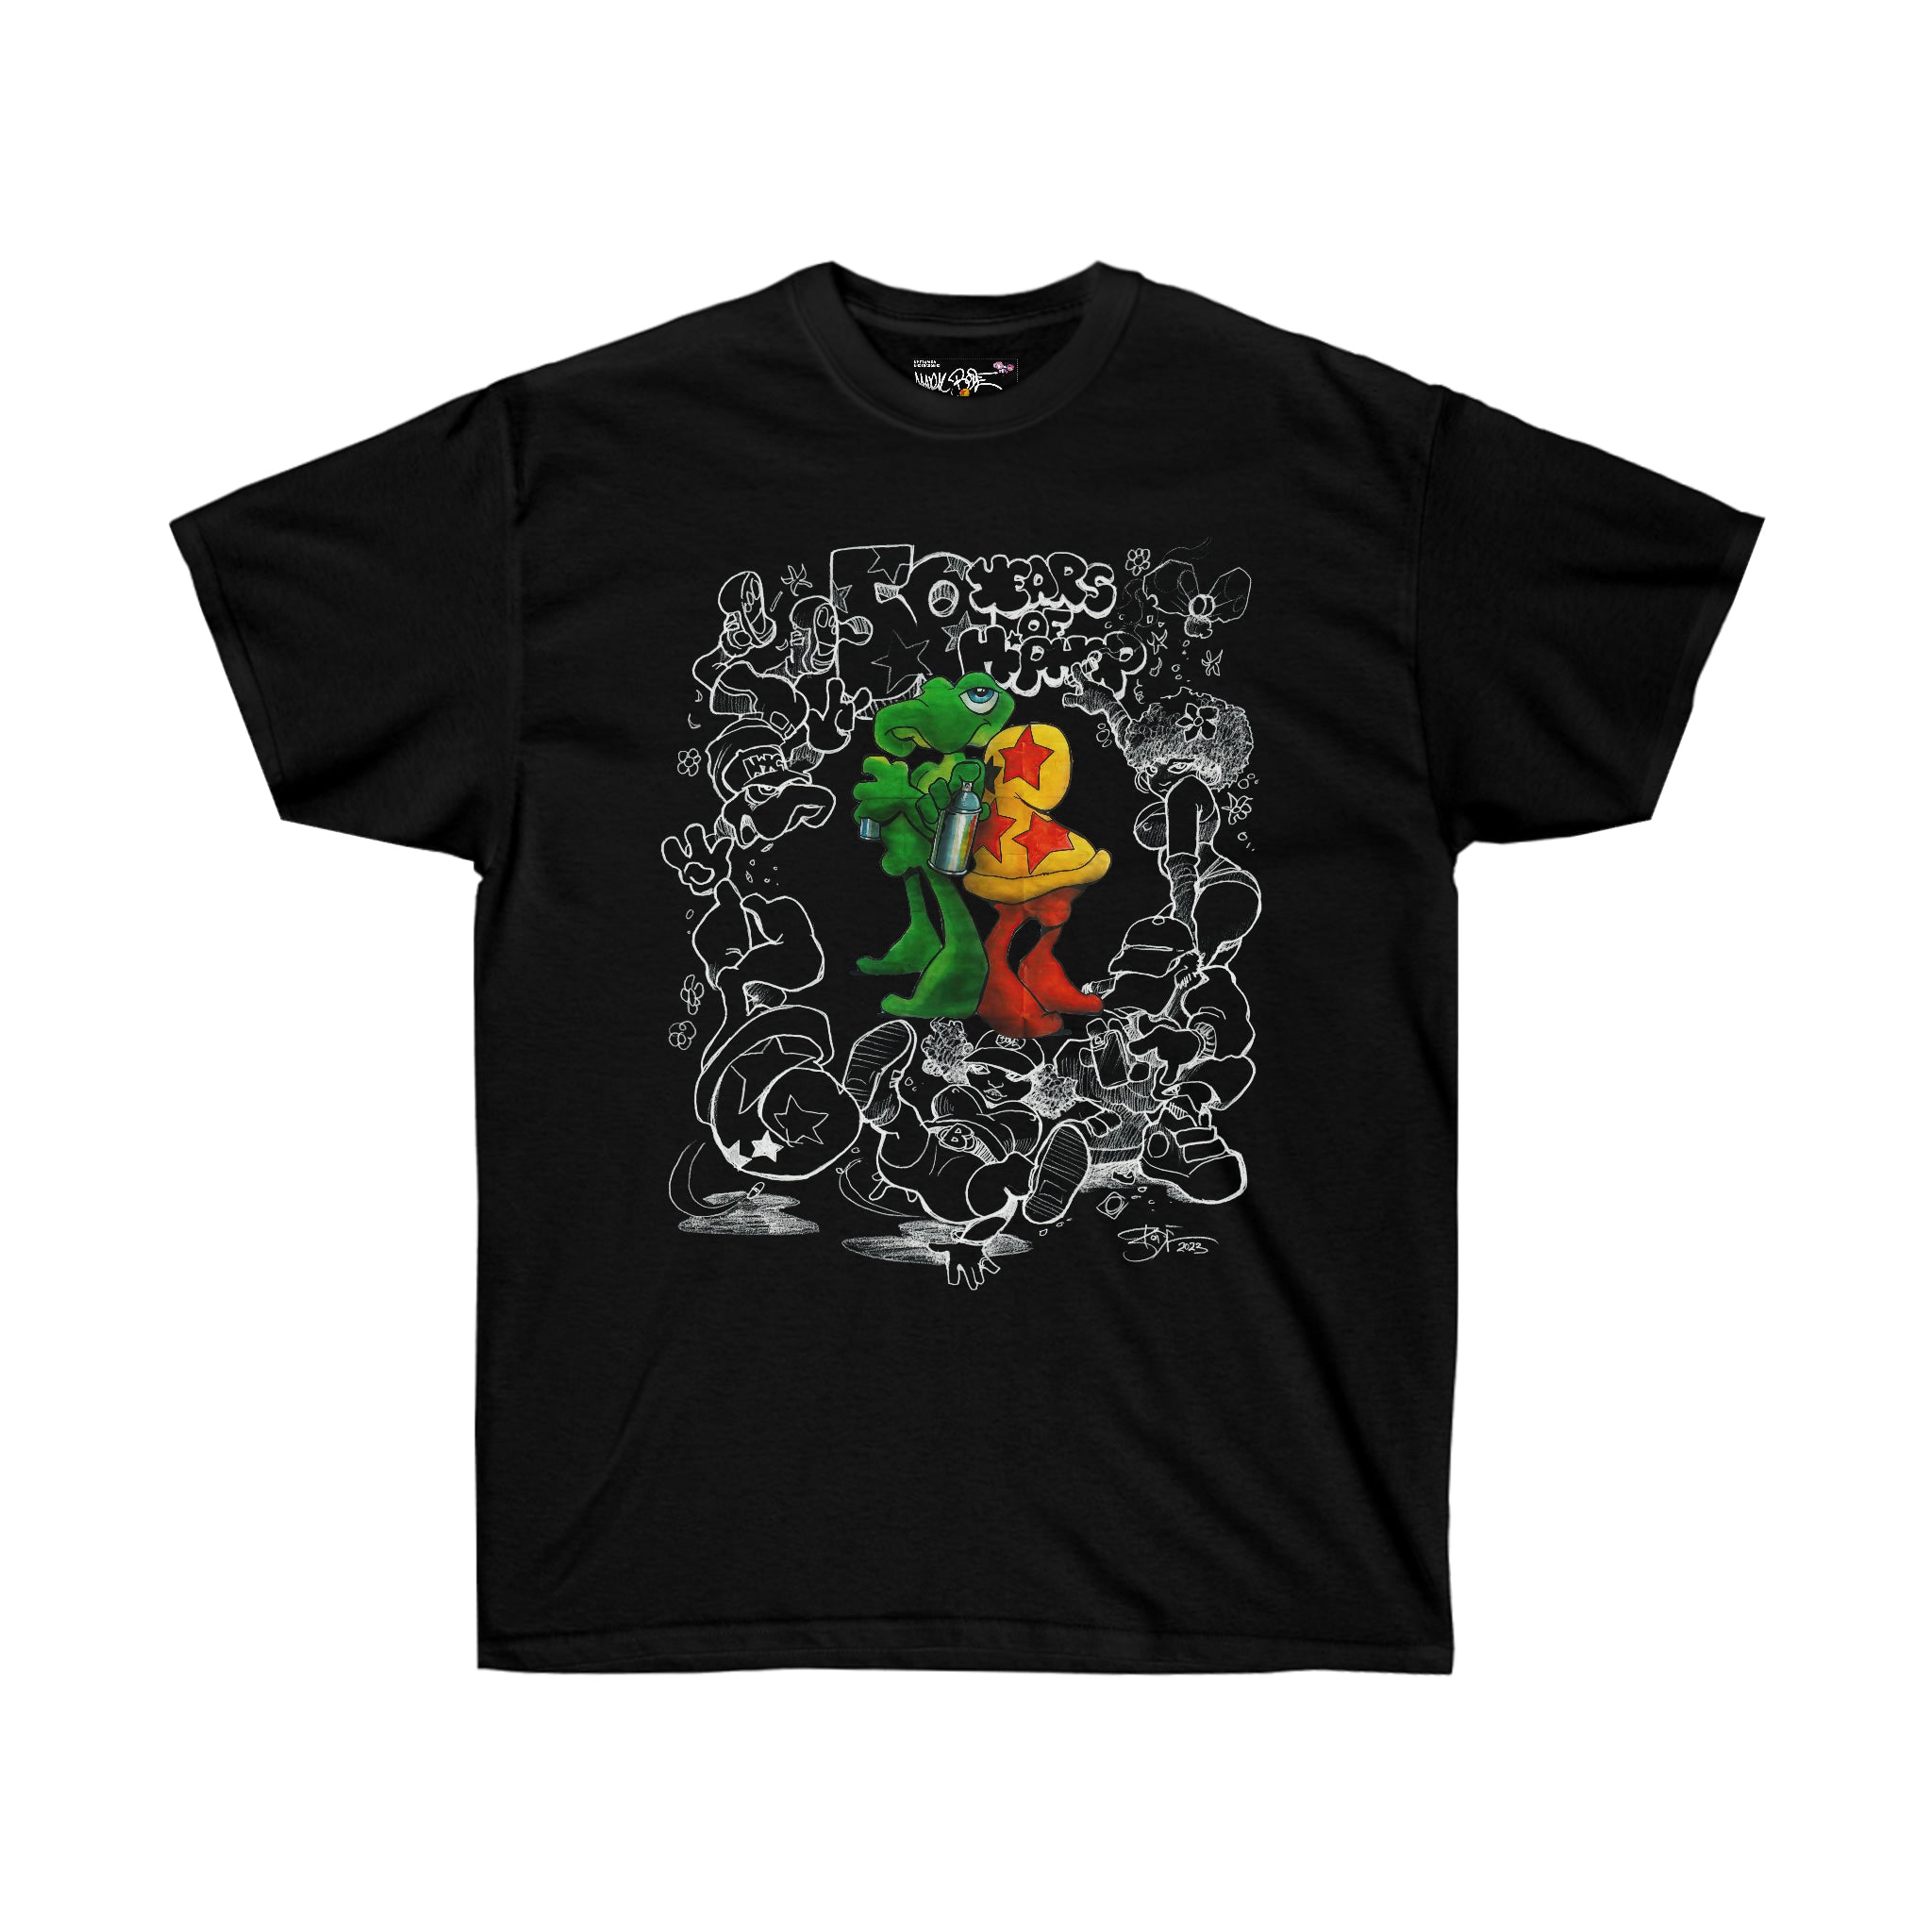 Bode X 50th Anniversary of Hip Hop Limited Edition Tee Black